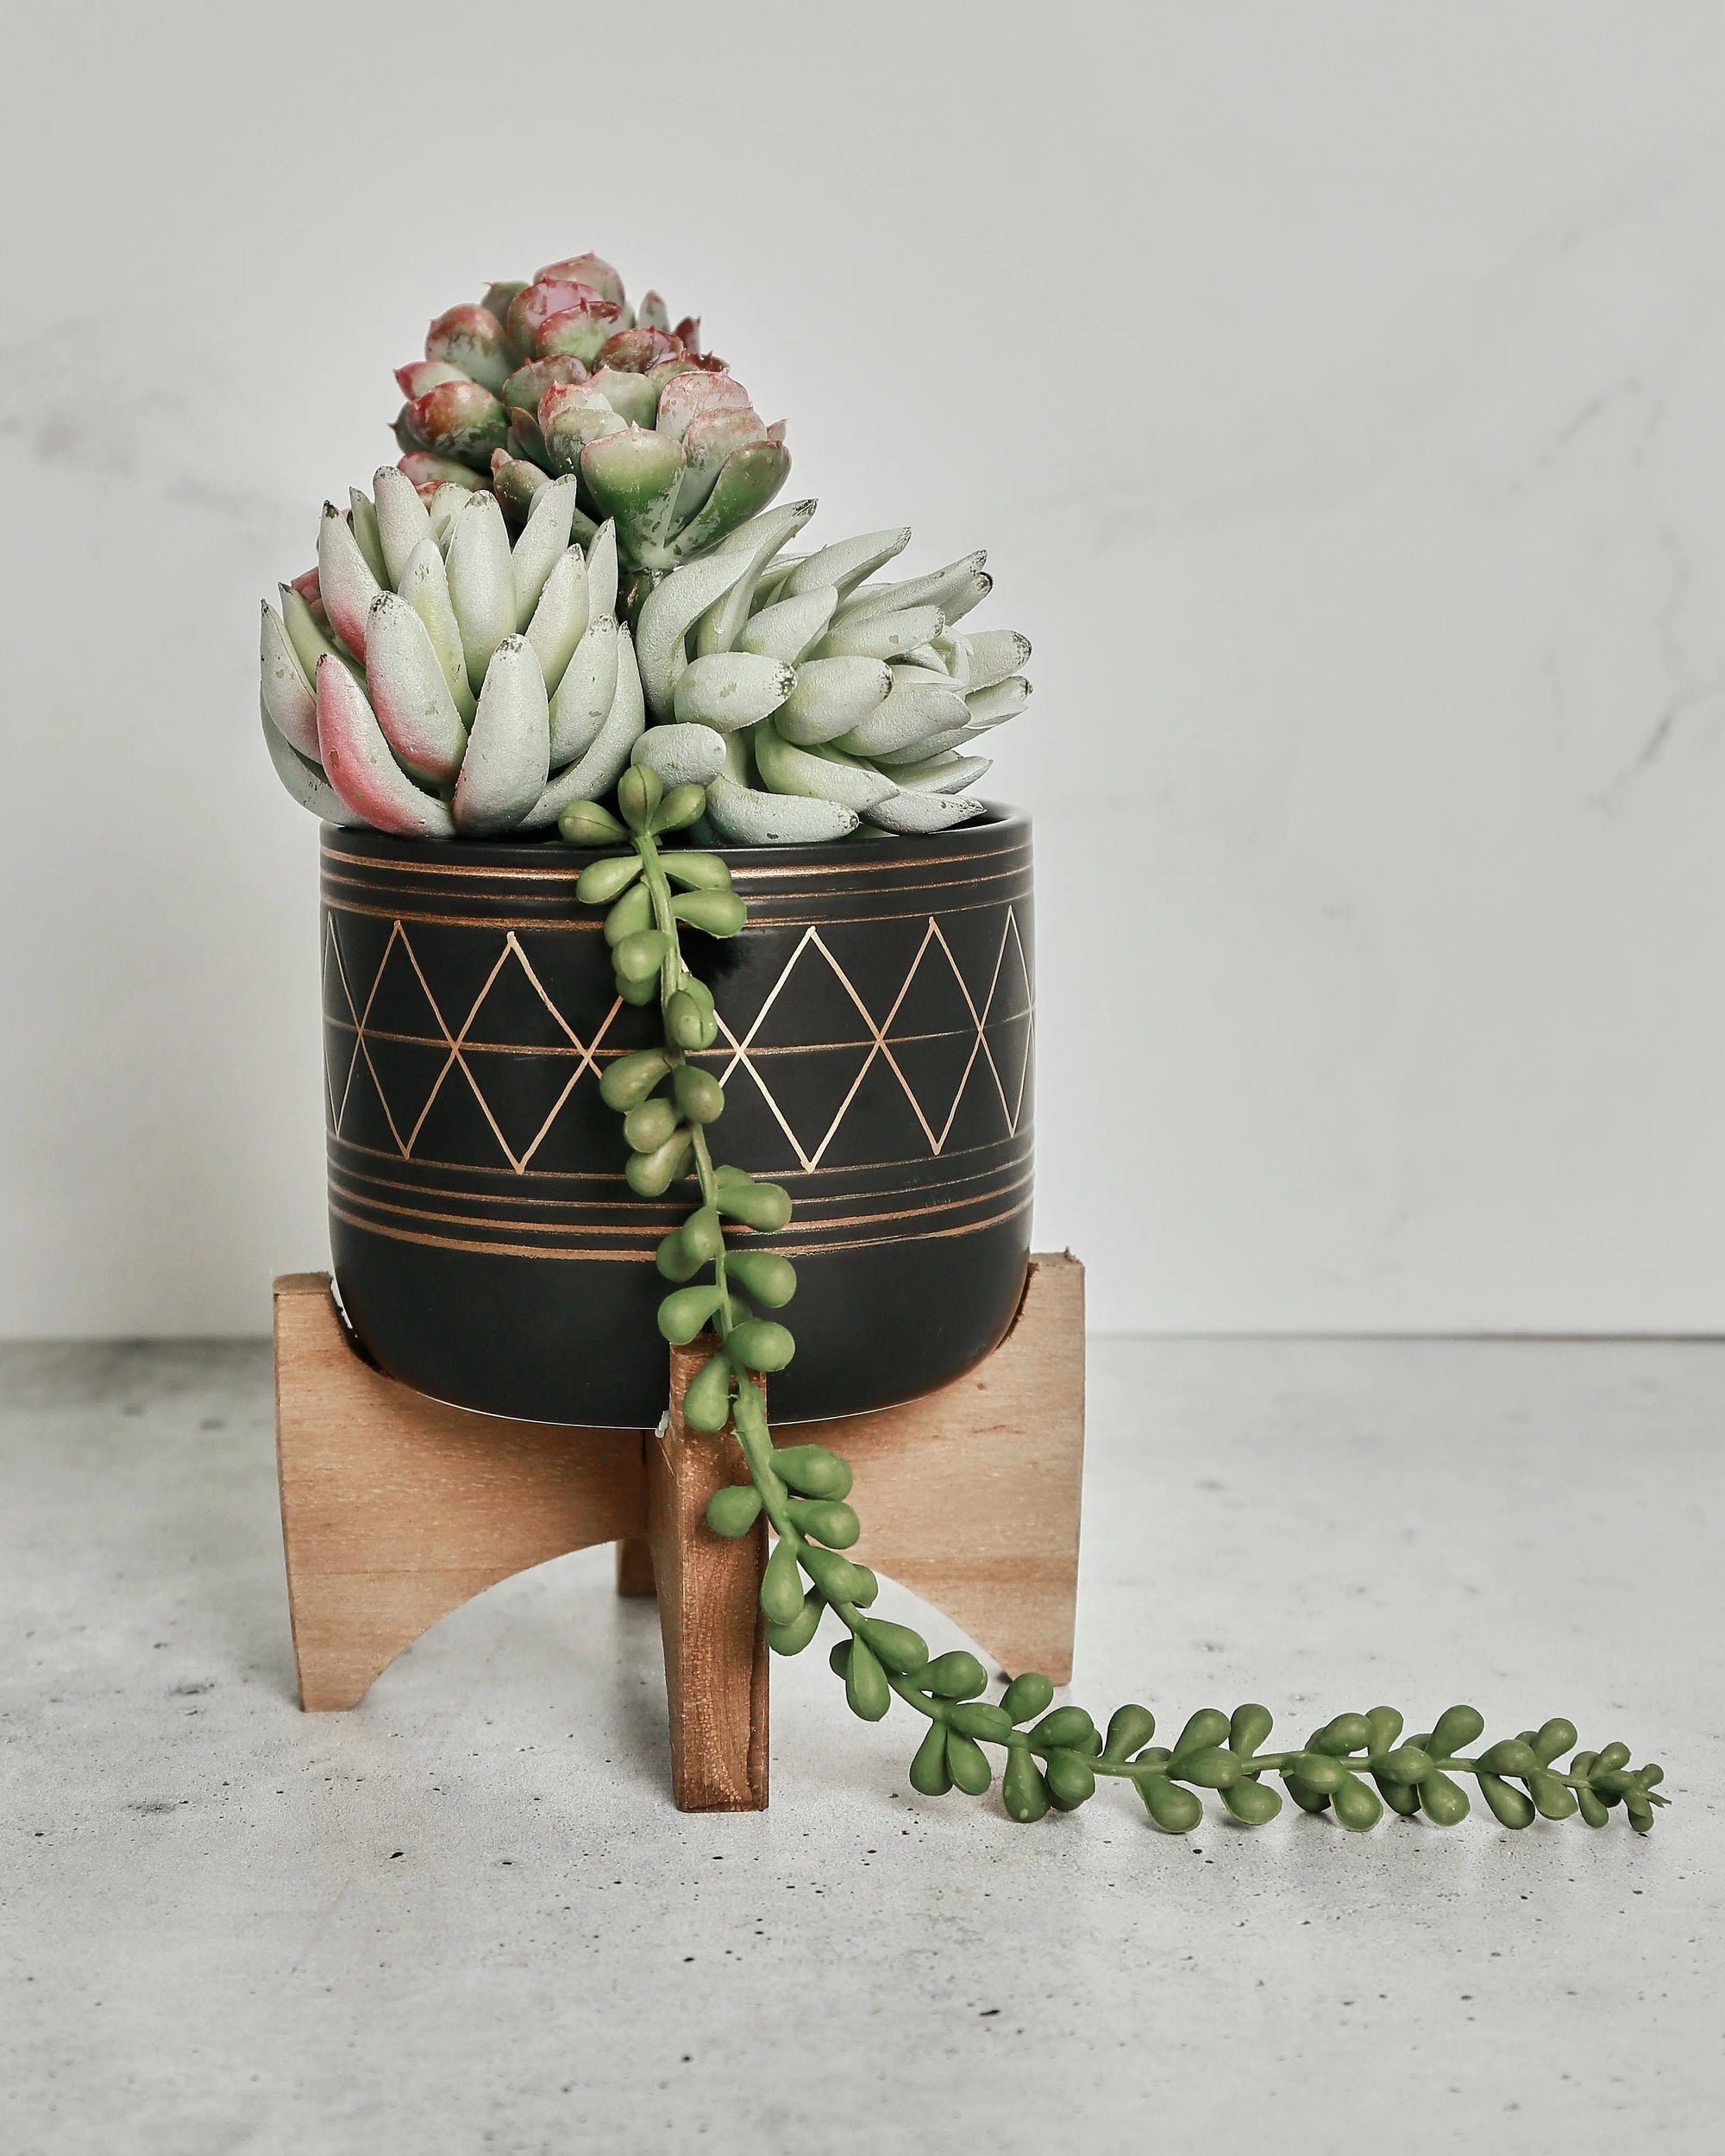 Handcrafted and hand-painted planter holder